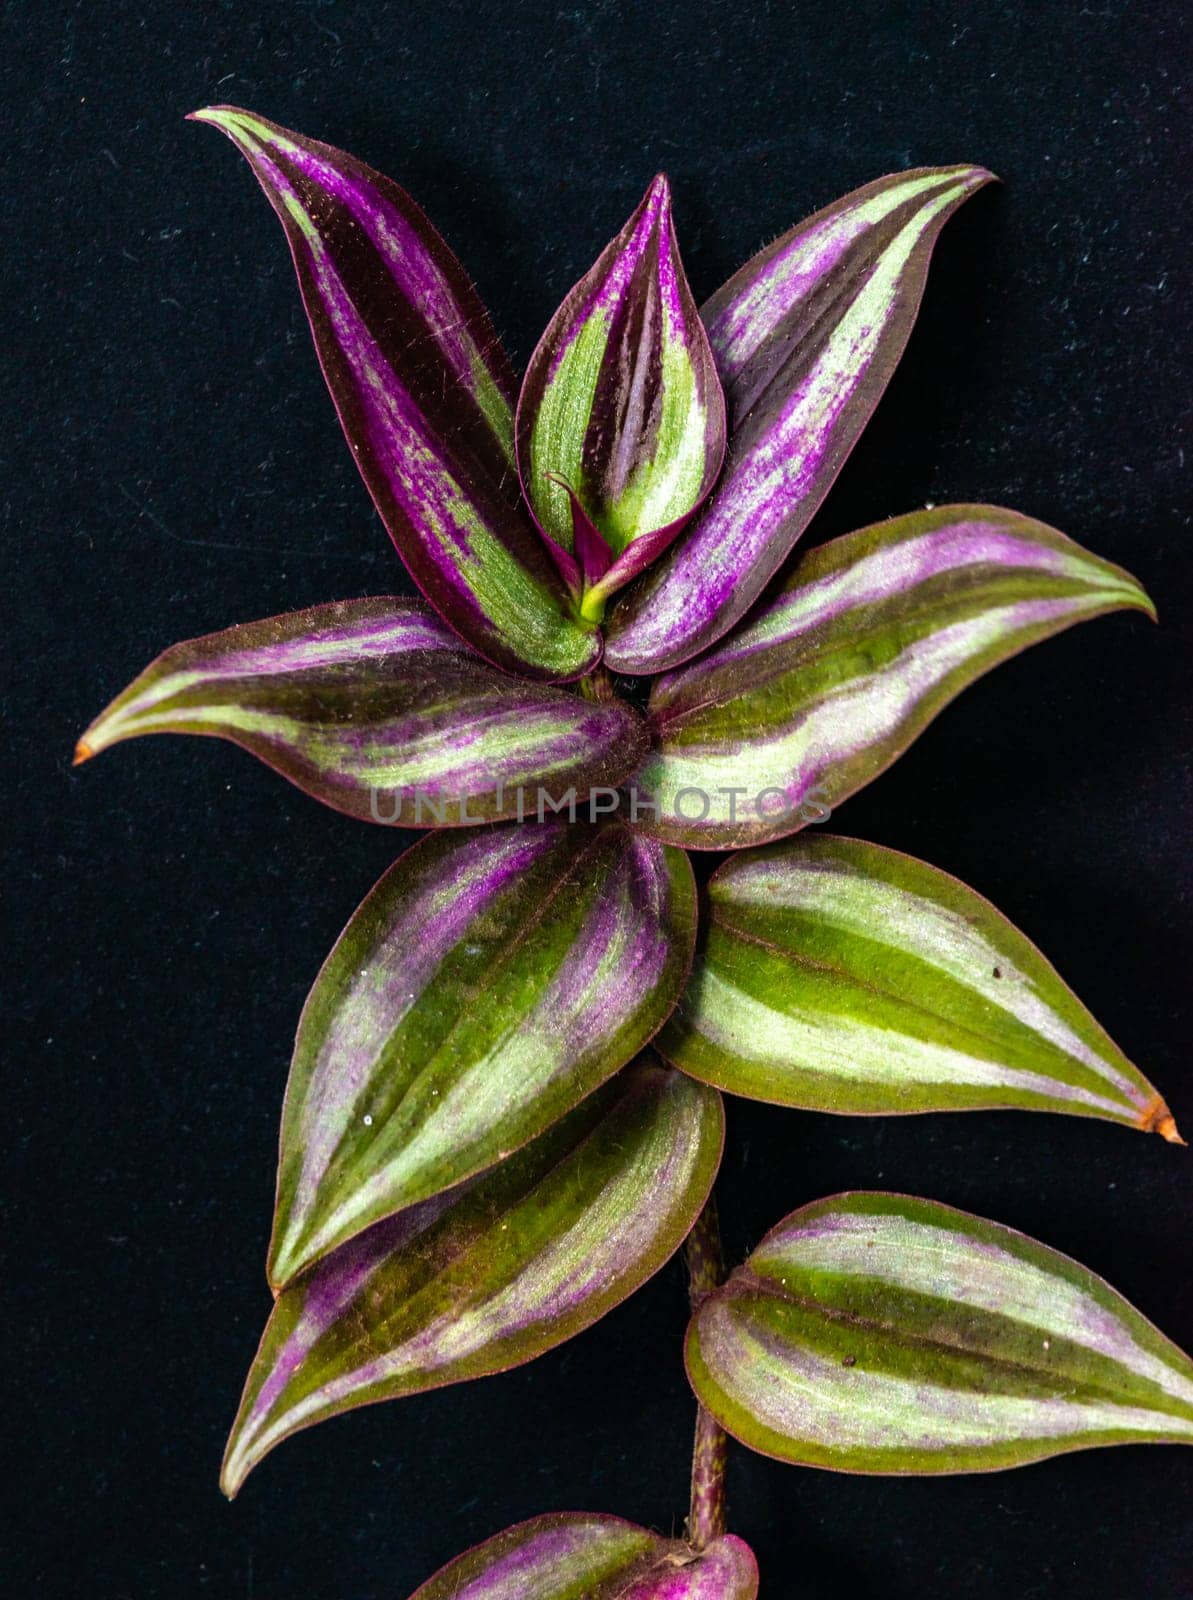 Silver inch plant Tradescantia zebrina - sprig of plant with striped leaves  by Hydrobiolog